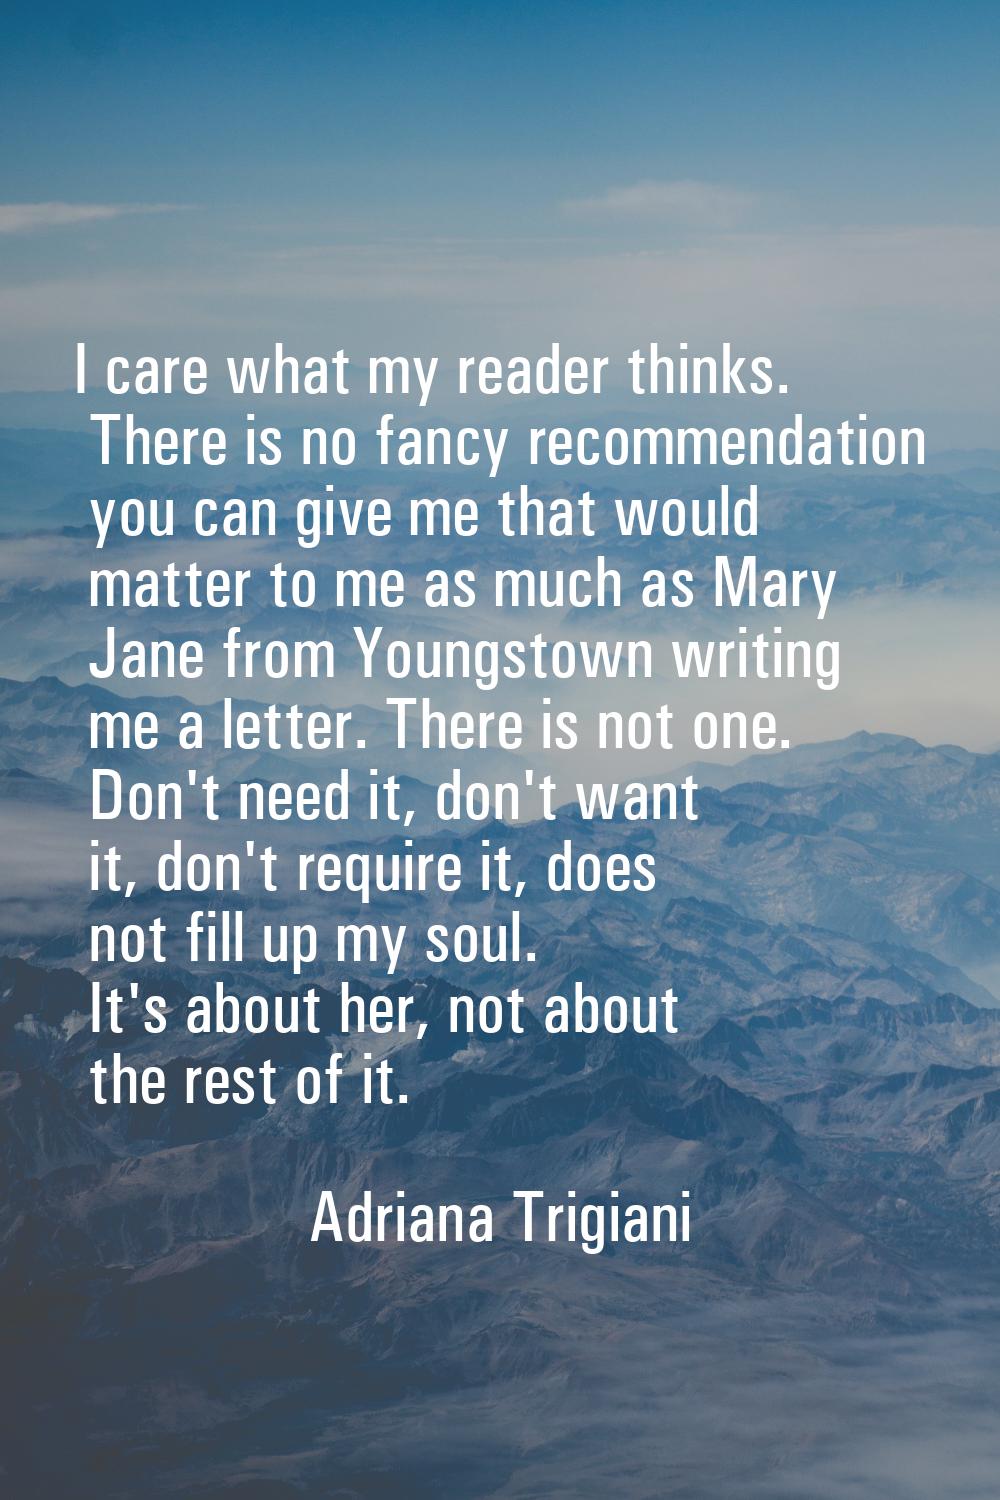 I care what my reader thinks. There is no fancy recommendation you can give me that would matter to